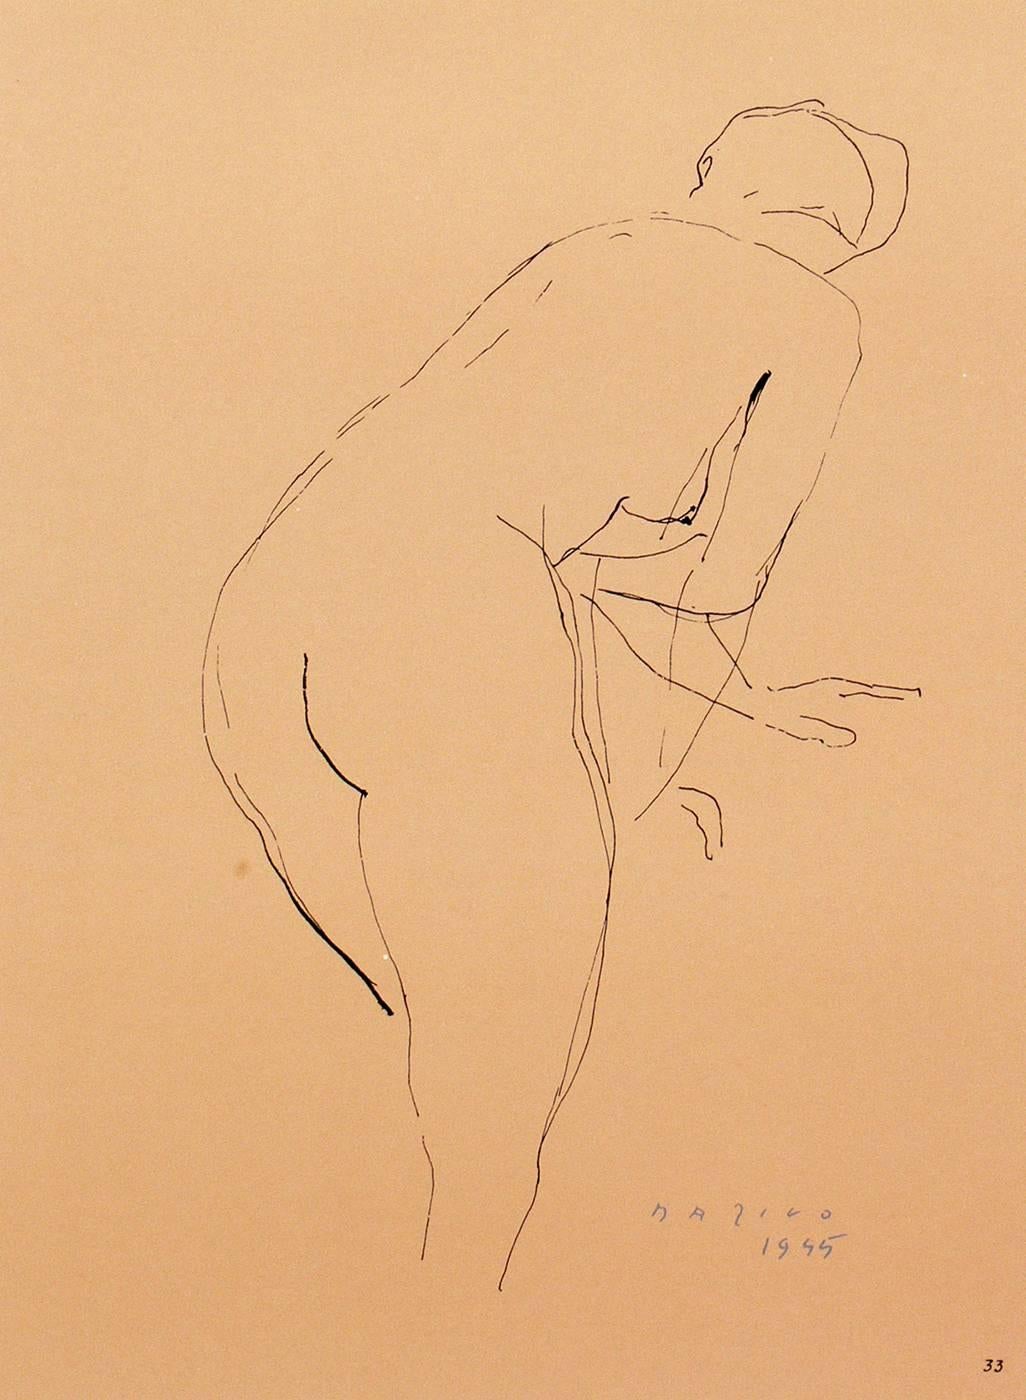 Pair of female nude figural lithographs by Marino Marini, from the Marino Marini portfolio, printed by Carl Schünemann, Germany, circa 1968. They have been framed in clean lined black lacquer gallery frames. updated